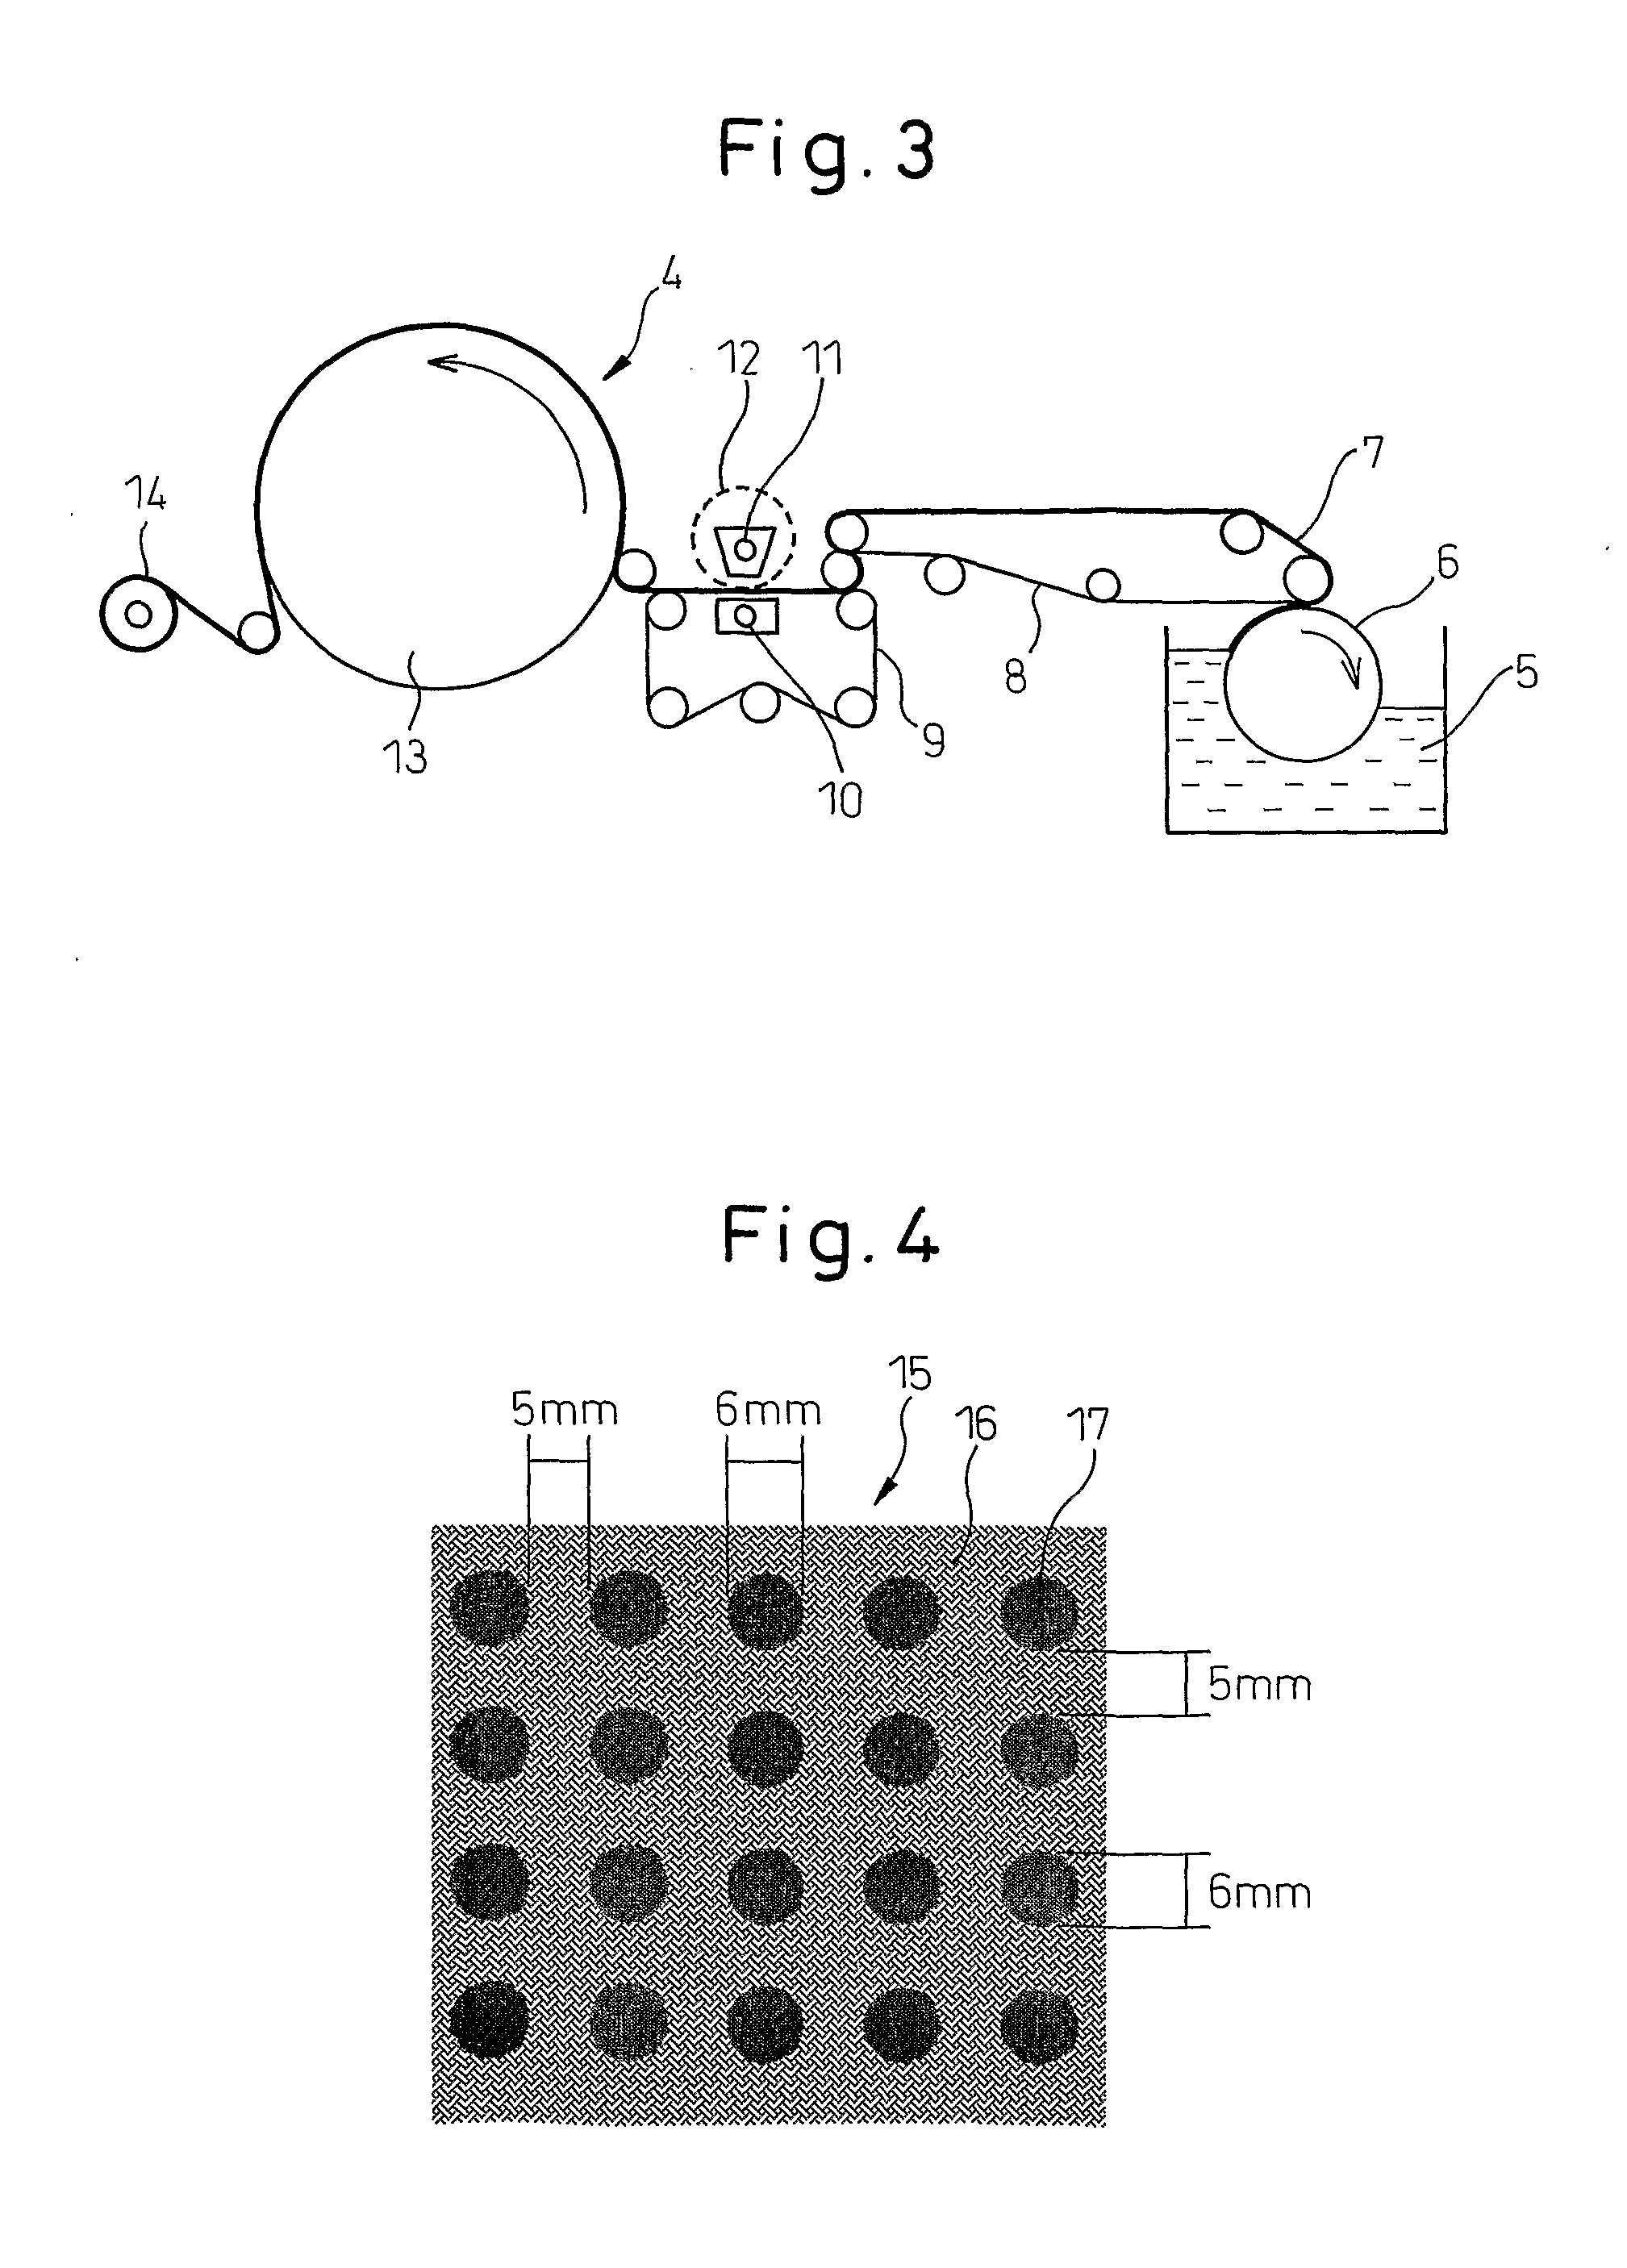 Bulky paper with rugged pattern and process for producing the same